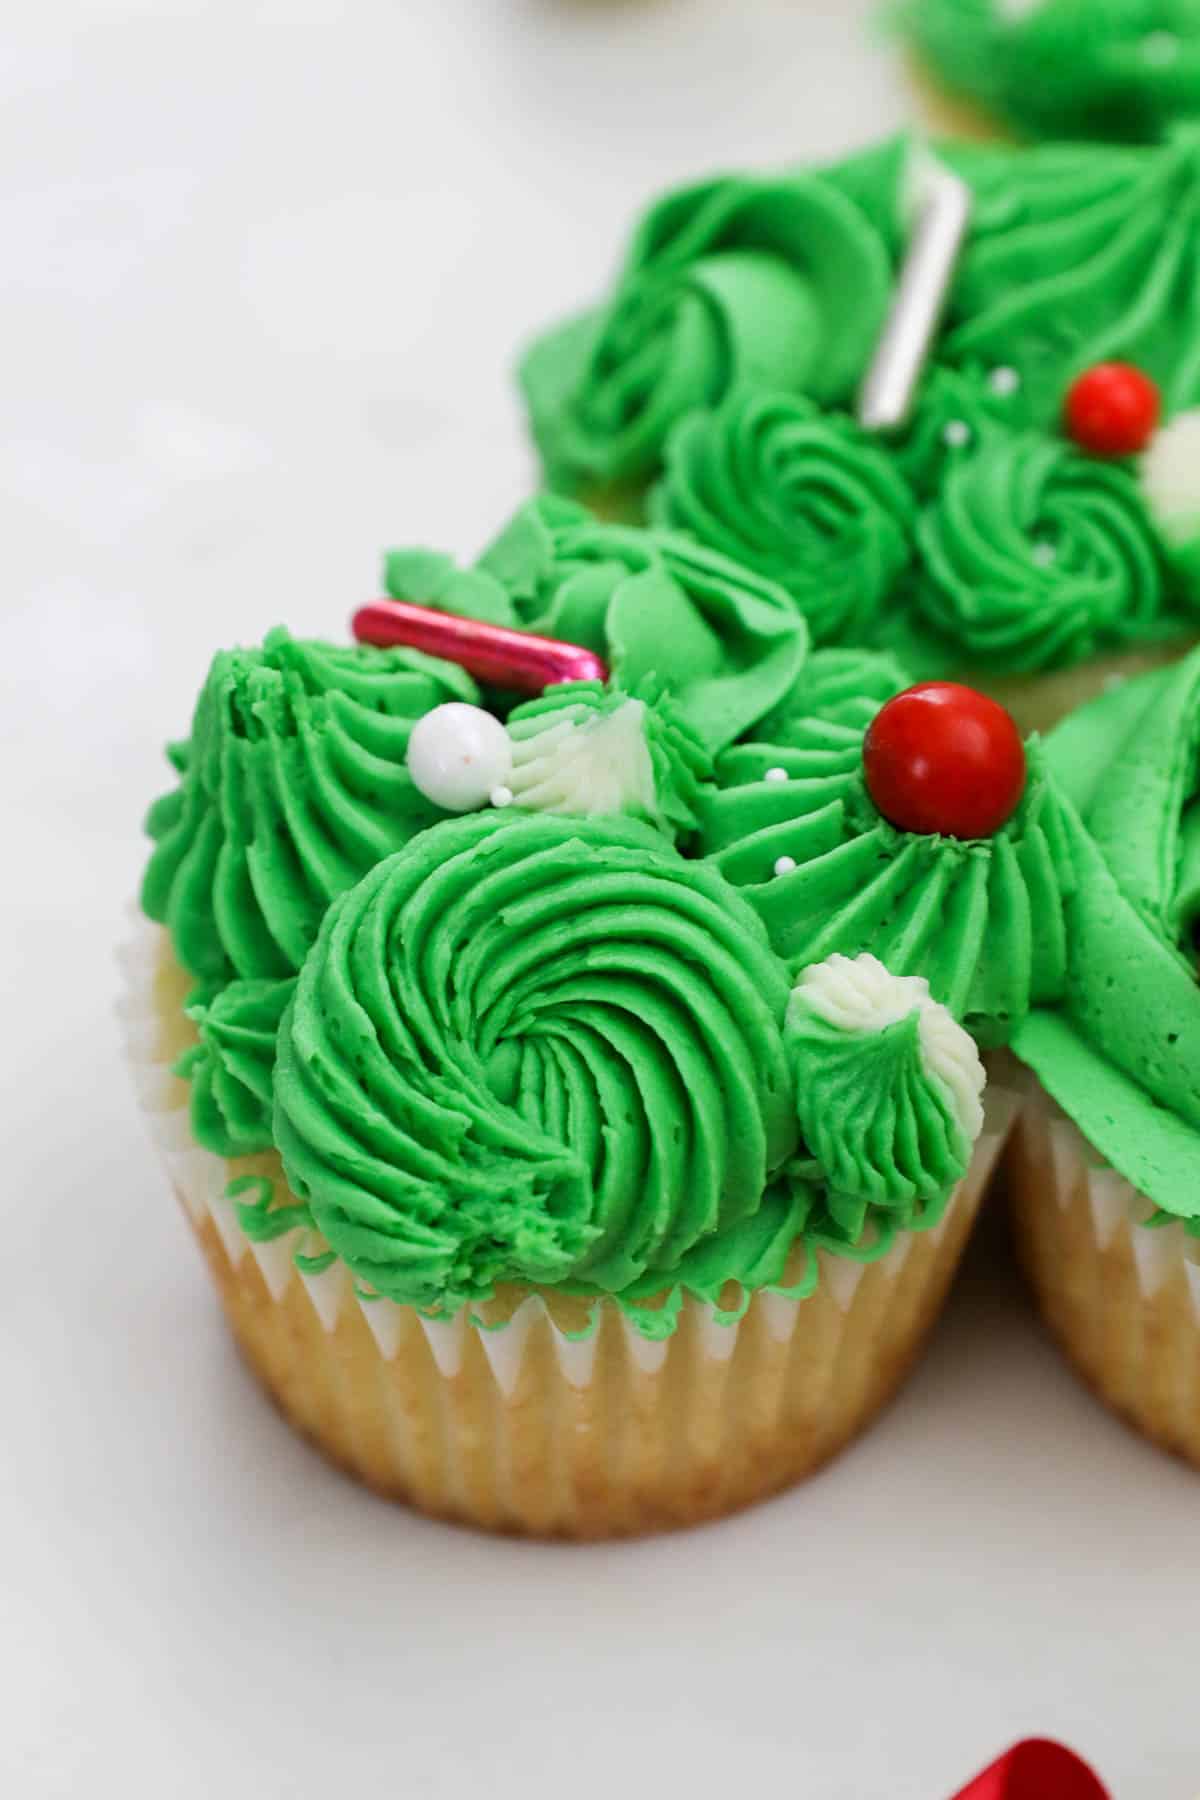 A vanilla cupcake decorated with swirls and roses made out of green frosting